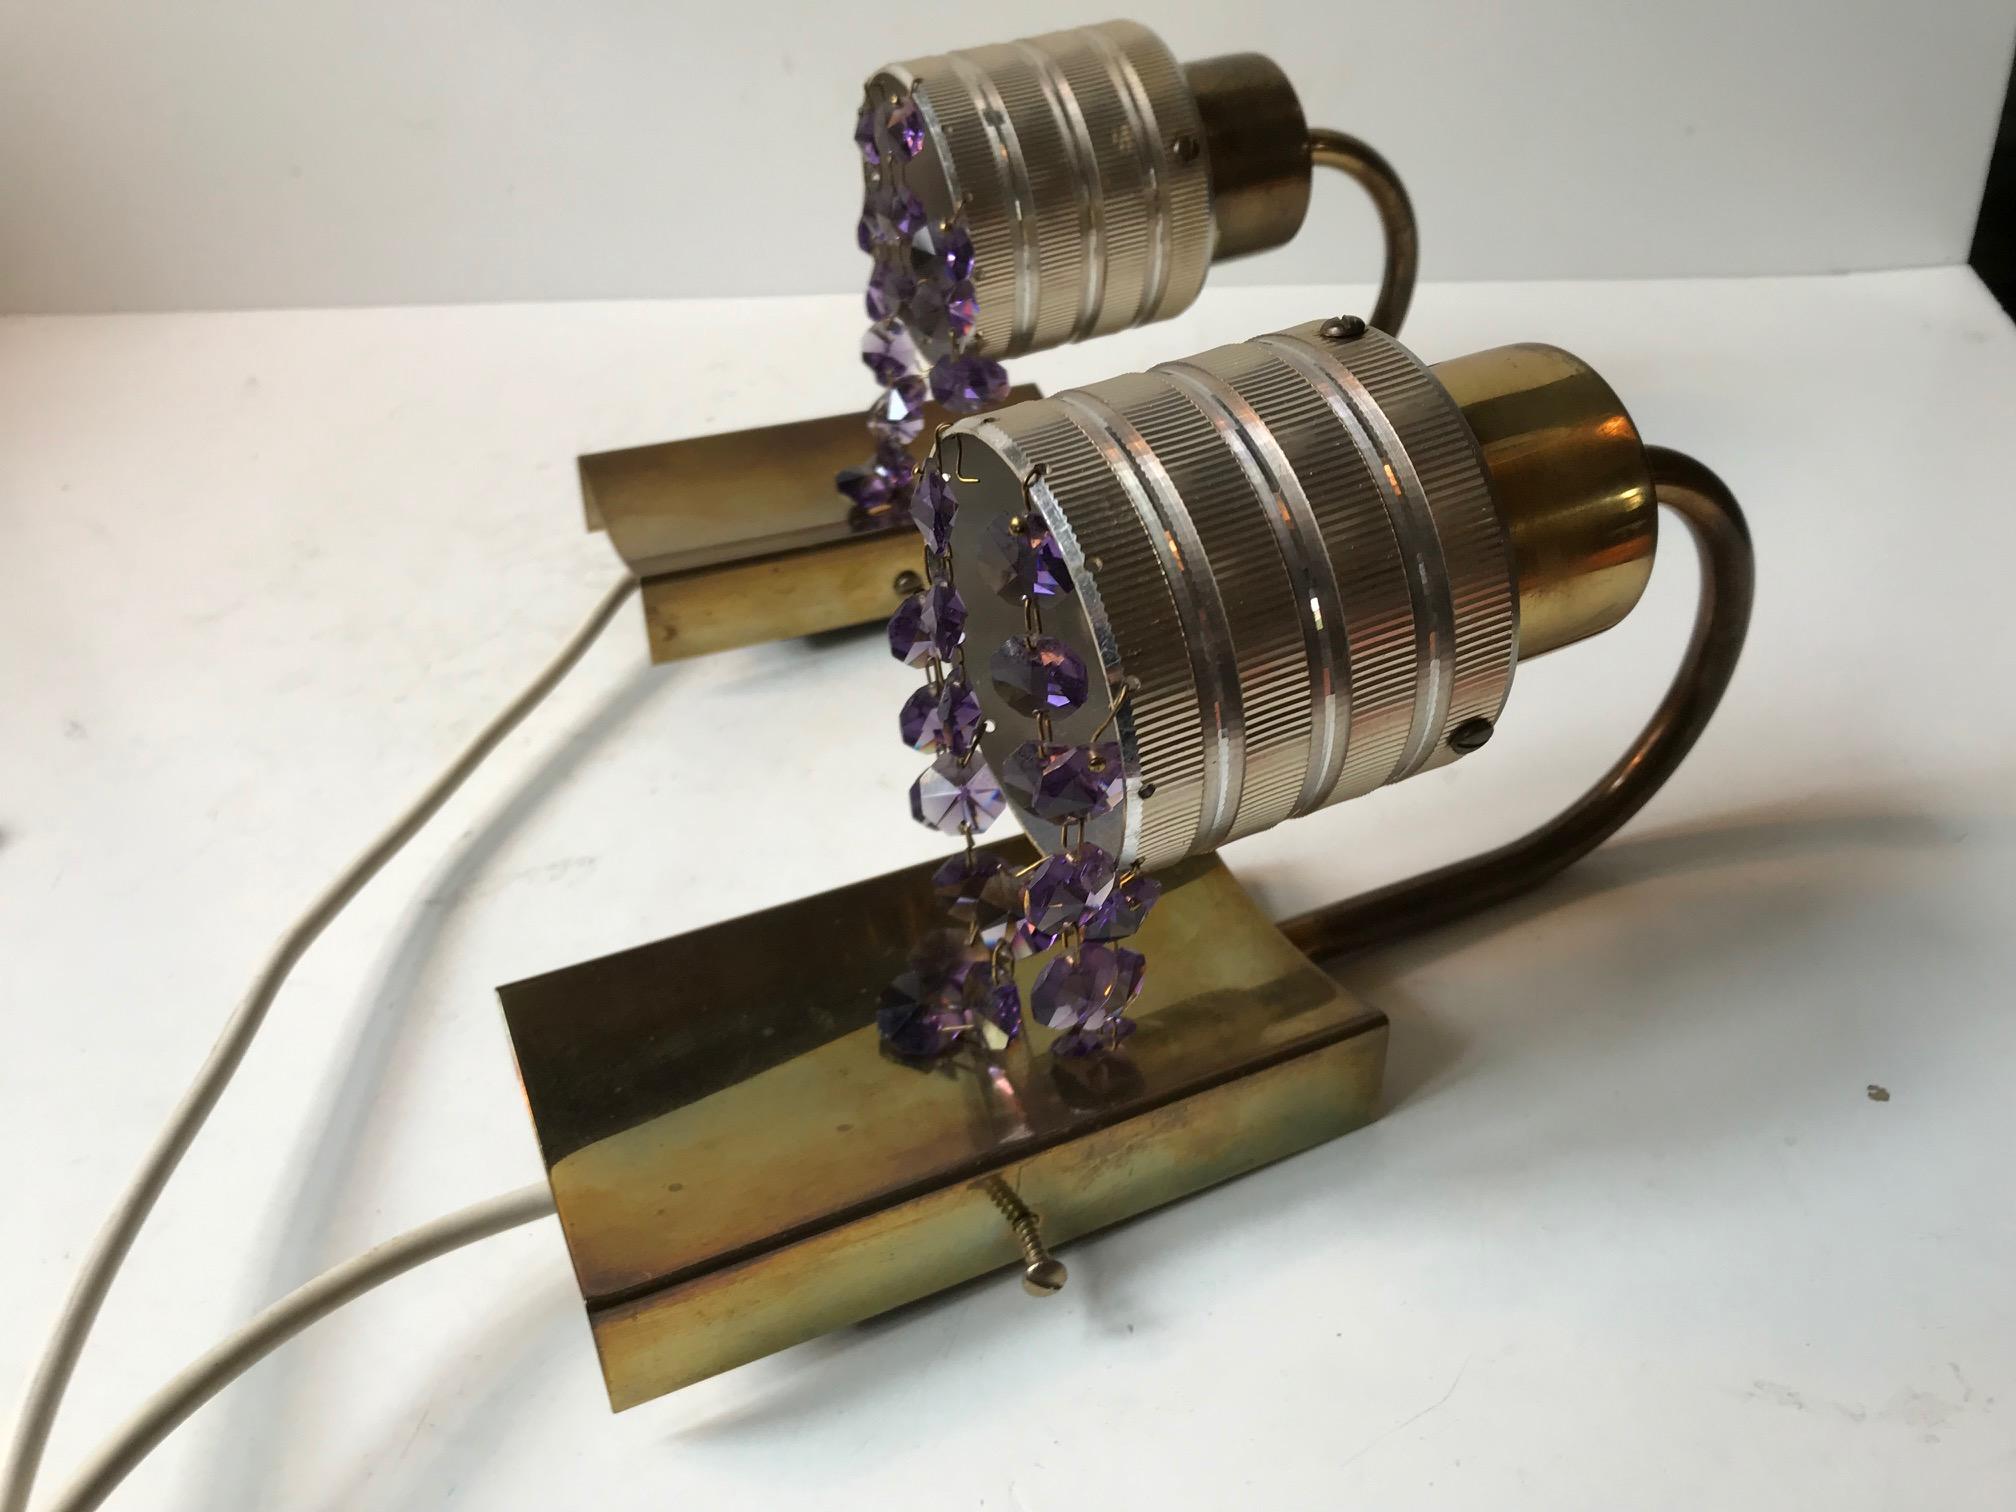 Scandinavian Modern Swag Prism Wall Sconces in Brass and Purple Crystal, 1960s In Good Condition For Sale In Esbjerg, DK